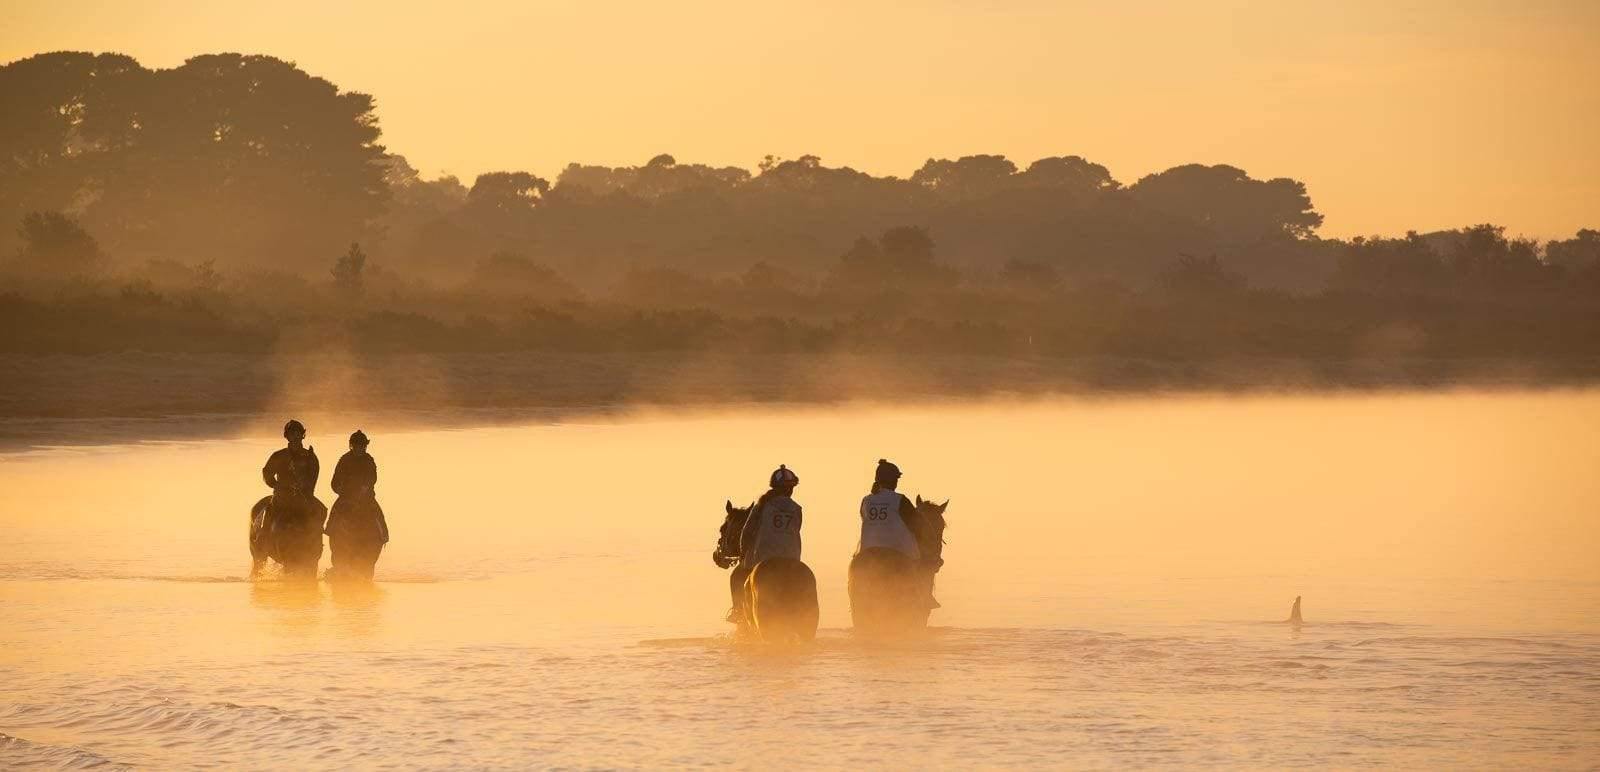 Two couple of horses standing far to each other with the feet of horses underwater, and a smoky fog in the far background, Balnarring Horses 13 - Mornington Peninsula Victoria  